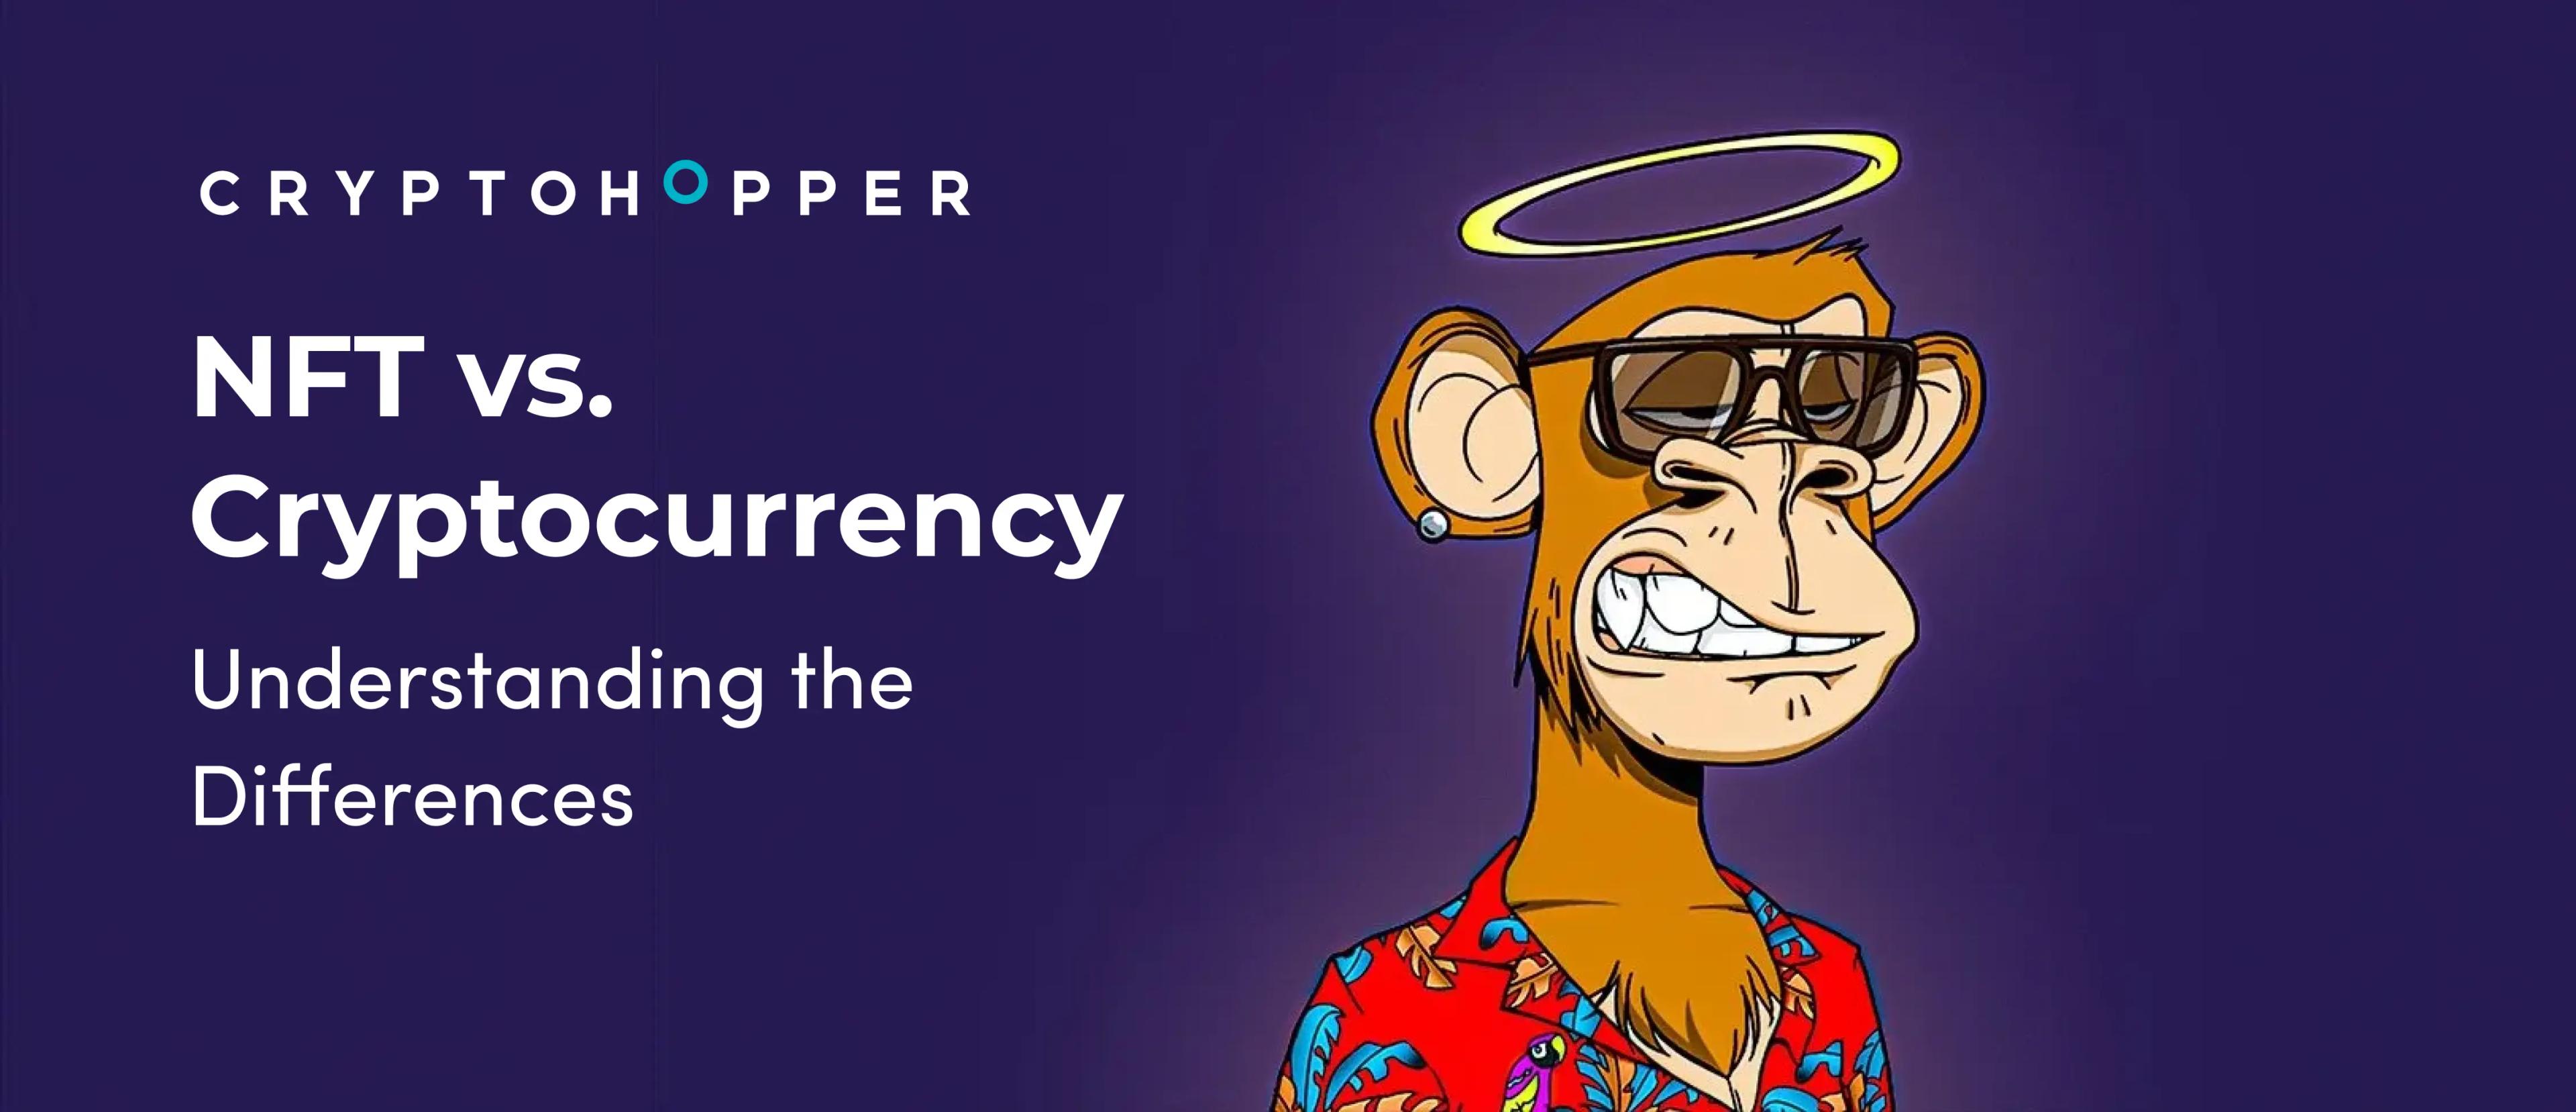 NFT vs. Cryptocurrency: Understanding the Differences